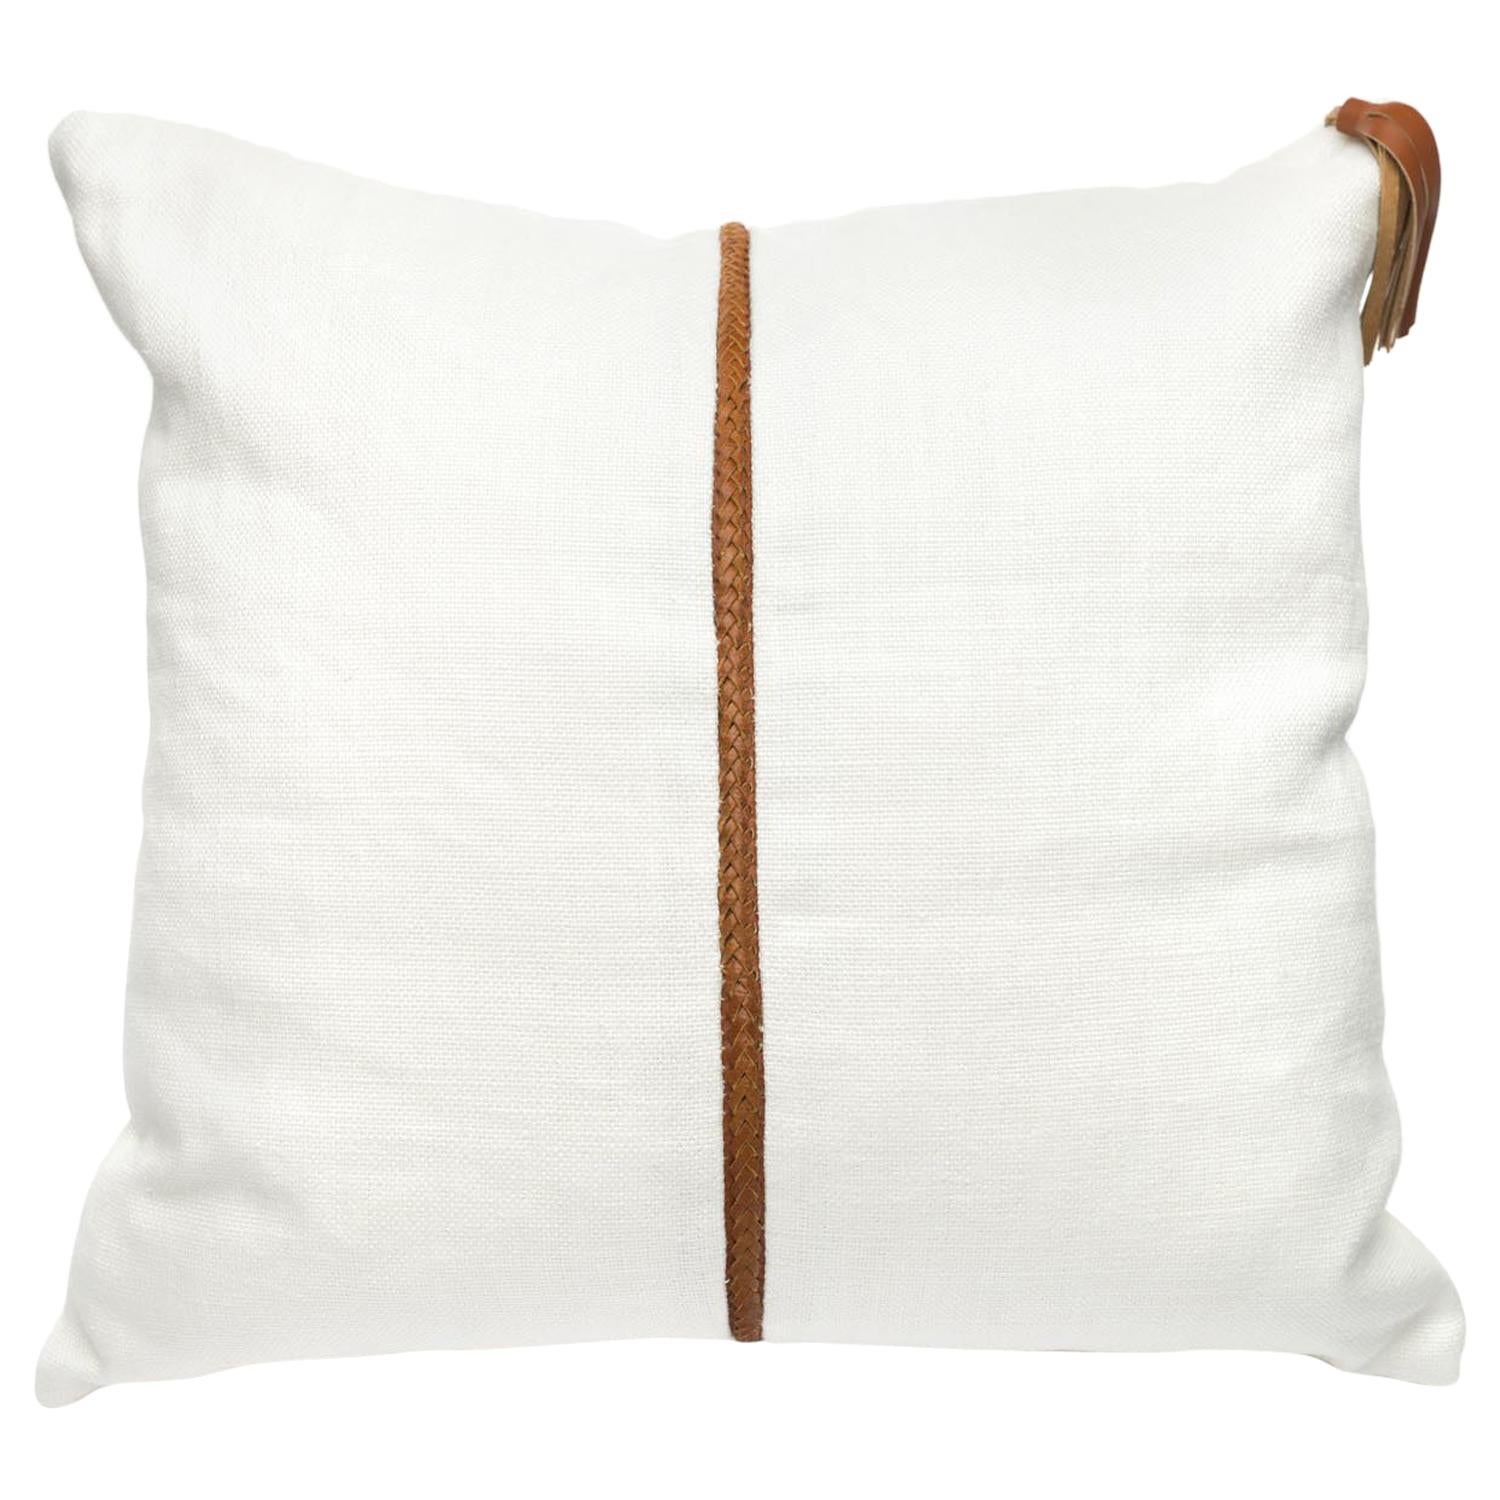 Linen Pillow with Leather Trimming and Tassel For Sale